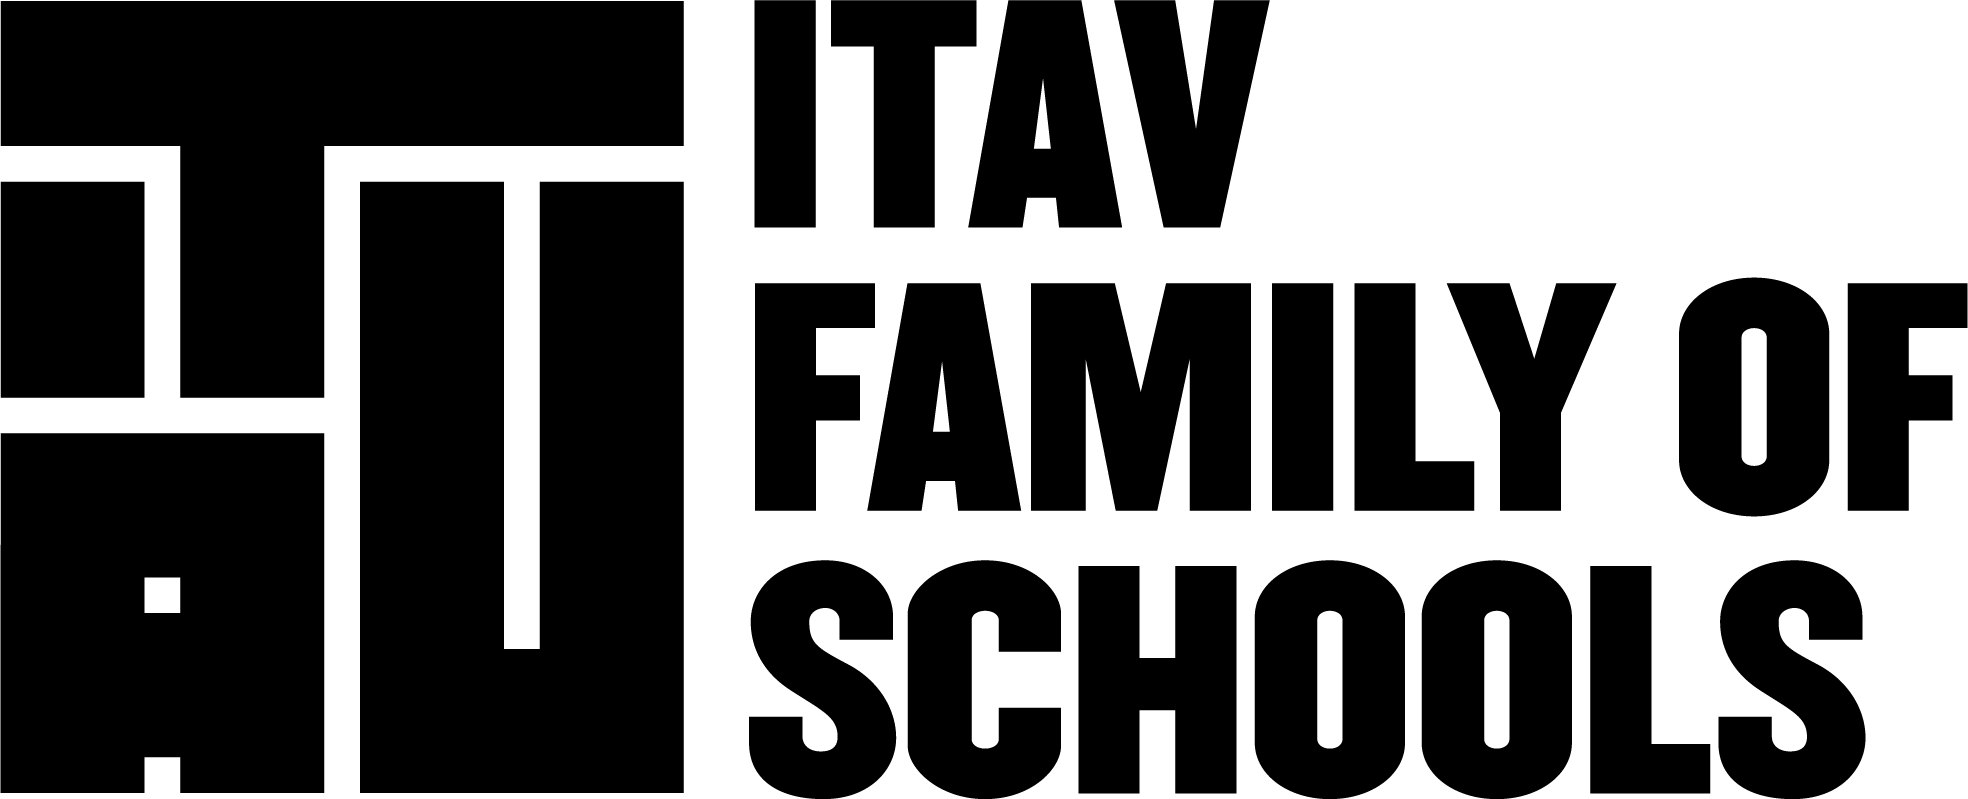 It Takes A Village Family of Schools logo